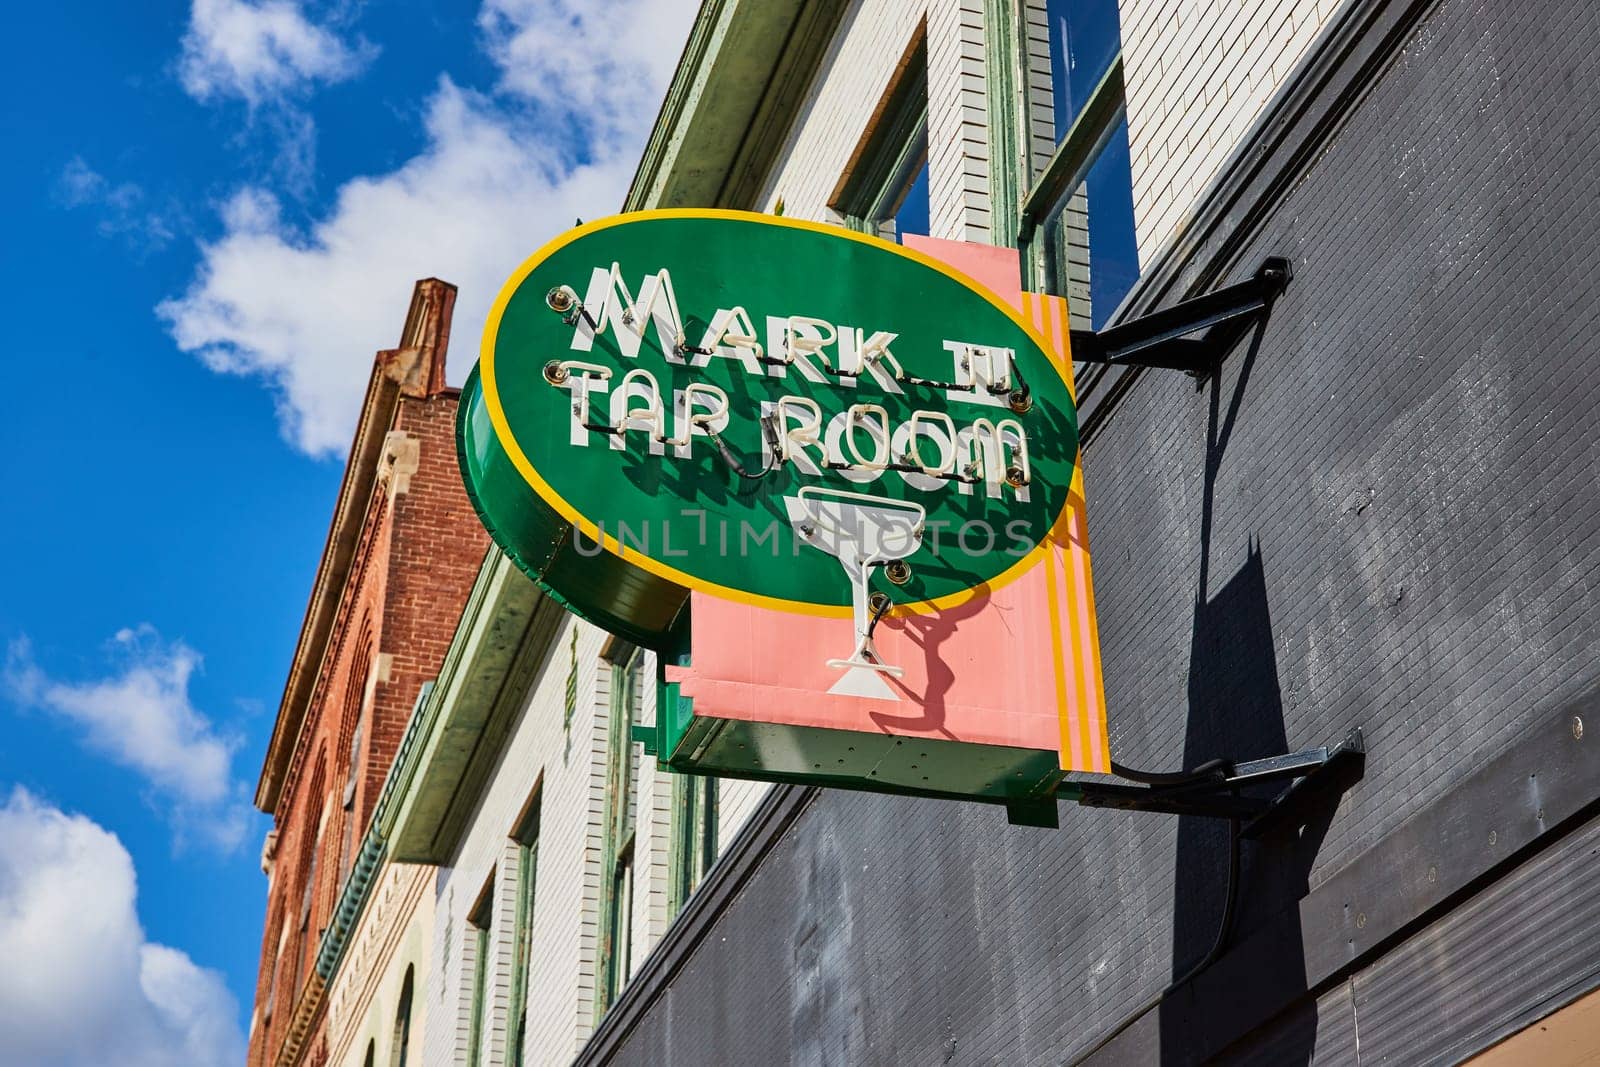 Retro-styled Mark II Tap Room sign under the clear blue sky in downtown Muncie, Indiana, showcasing local charm and vintage ambiance.